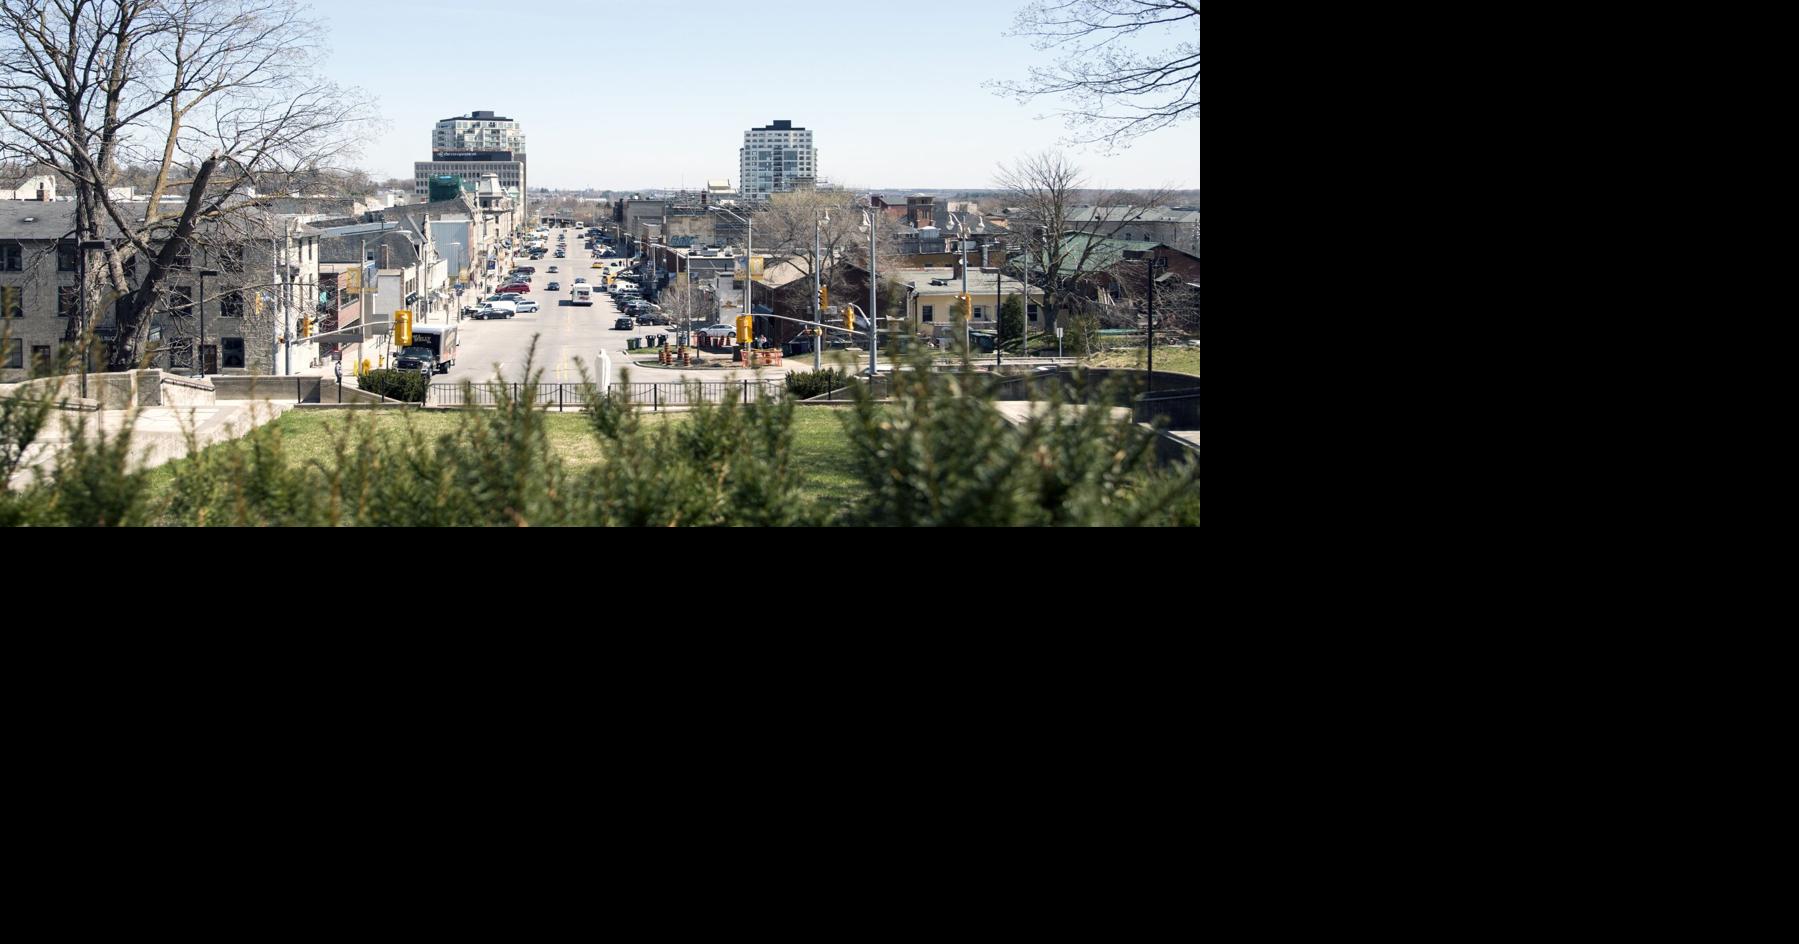 Guelph ranks among top 3 safest cities to live in Canada, rental site says